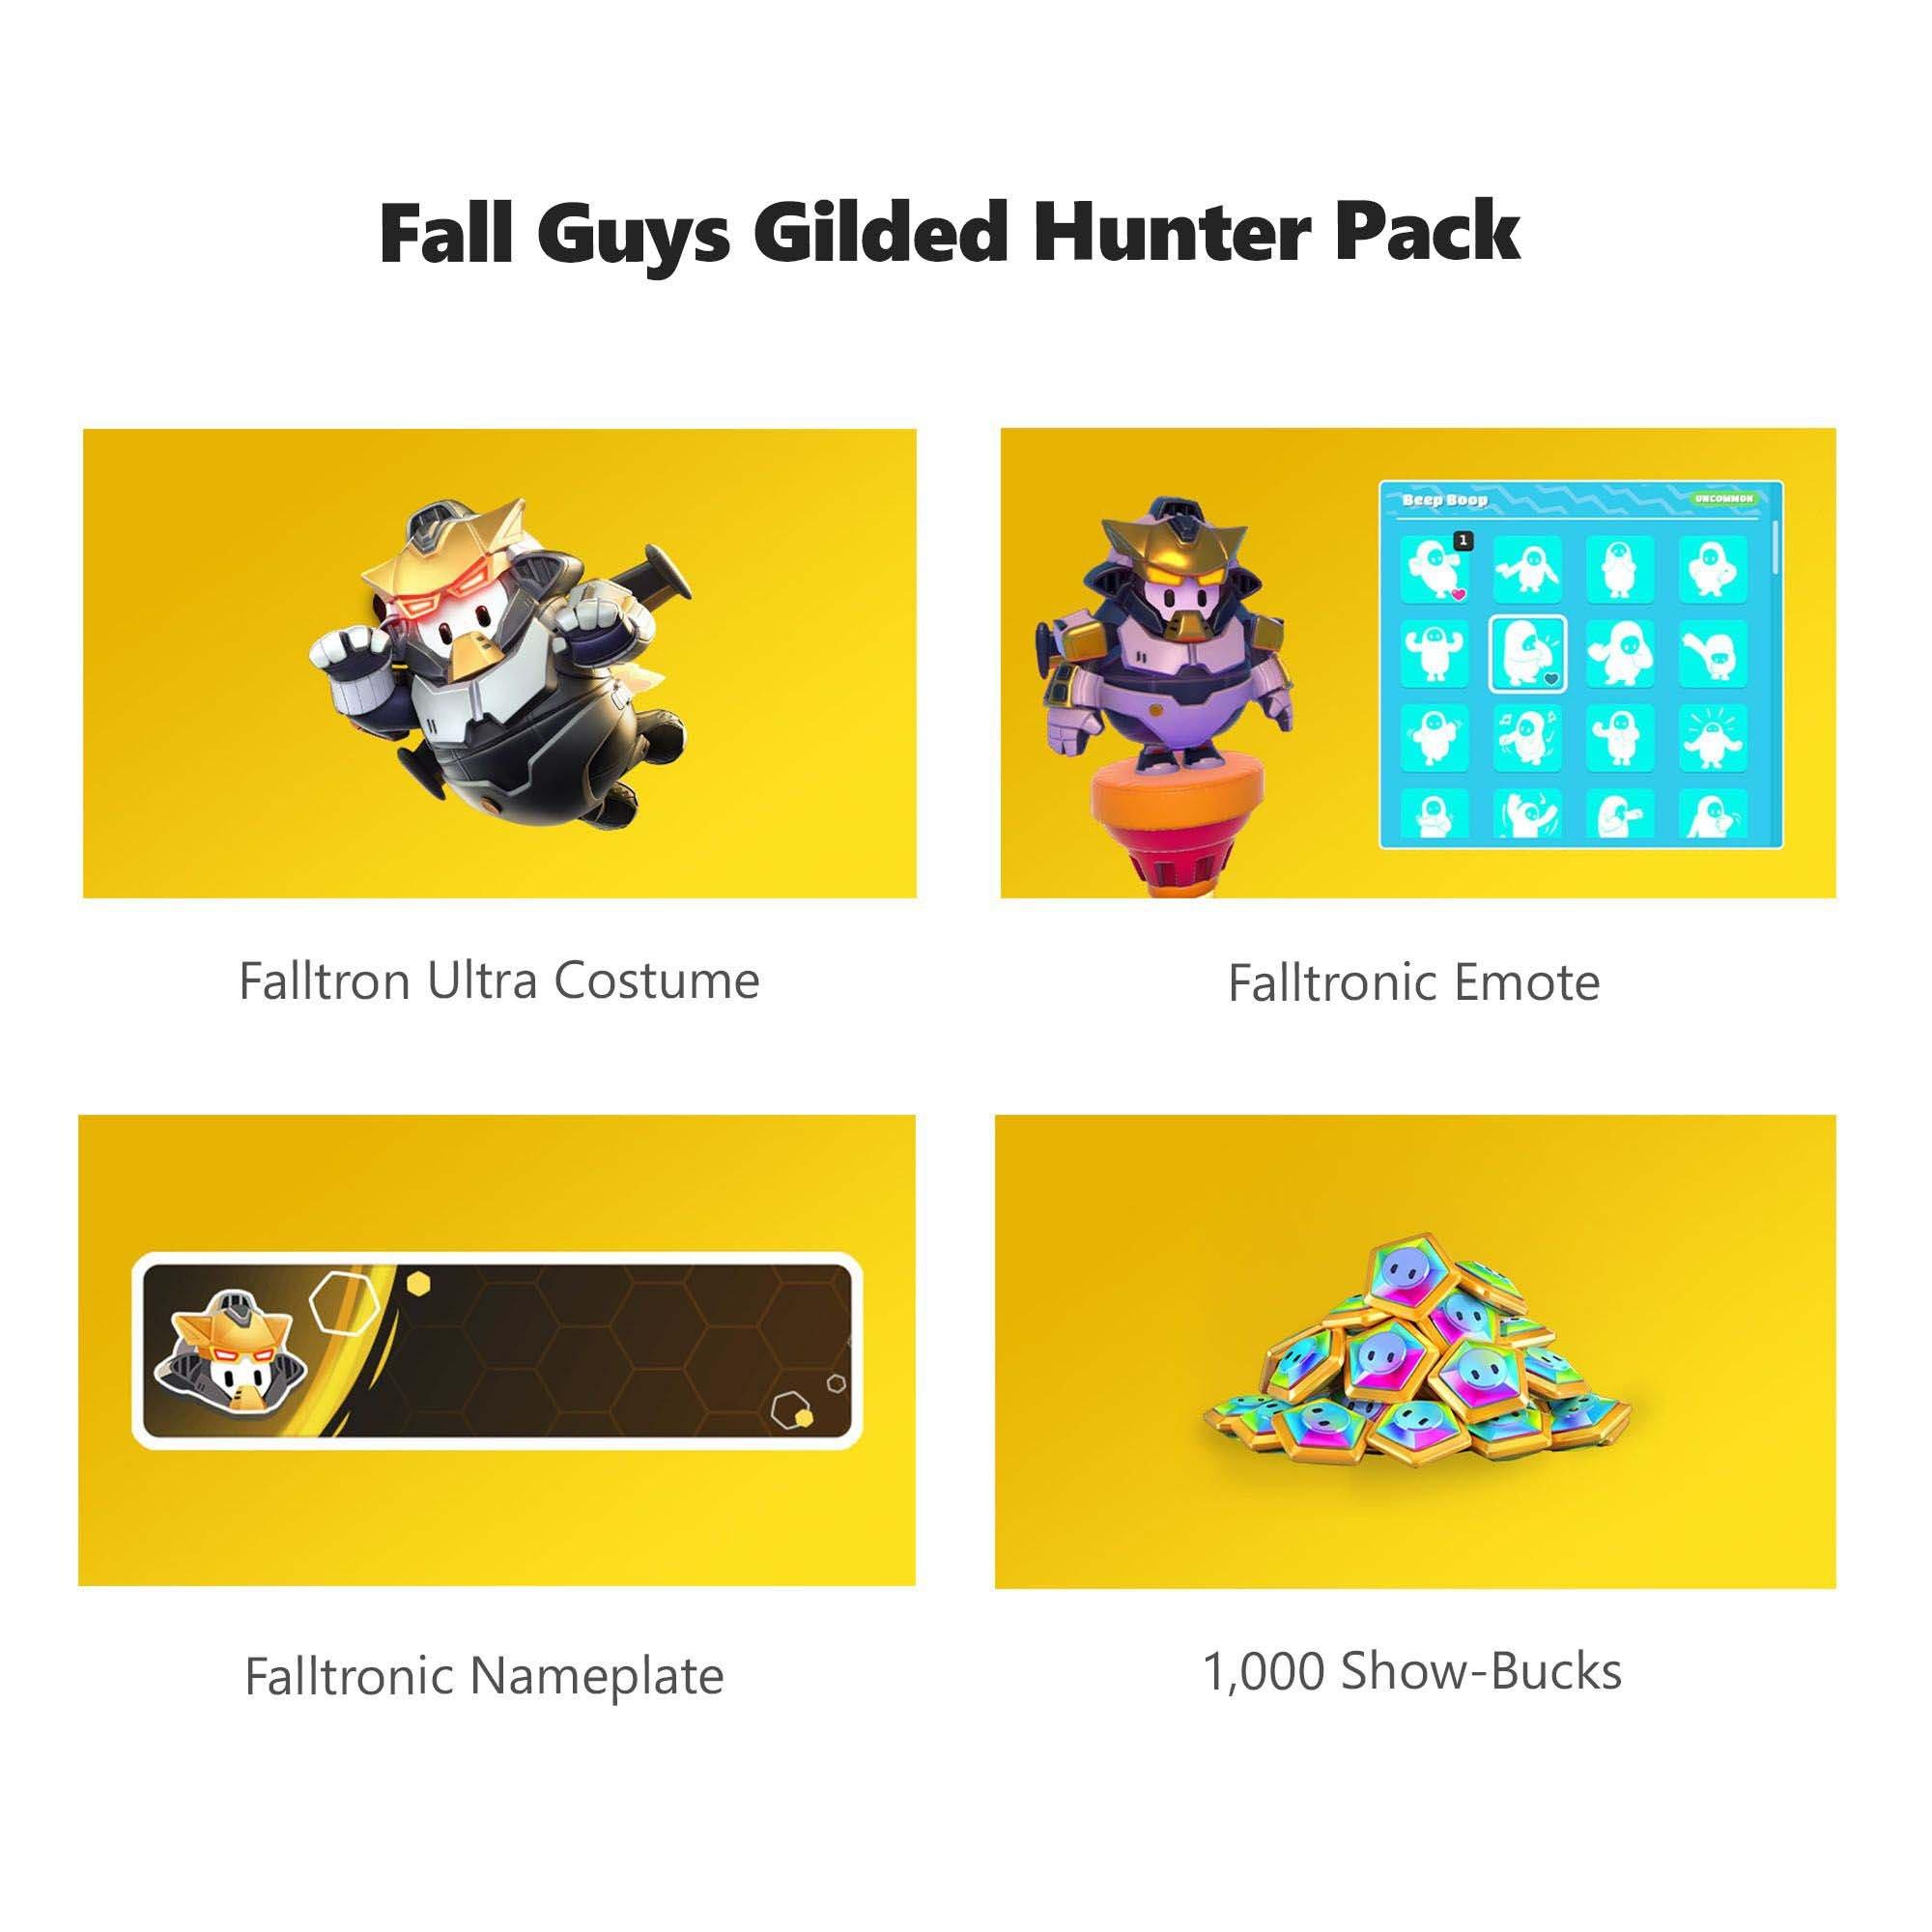 This Holiday Season Just Got Better: Announcing the Xbox Series S - Gilded  Hunter Bundle Coming November 29 - Xbox Wire